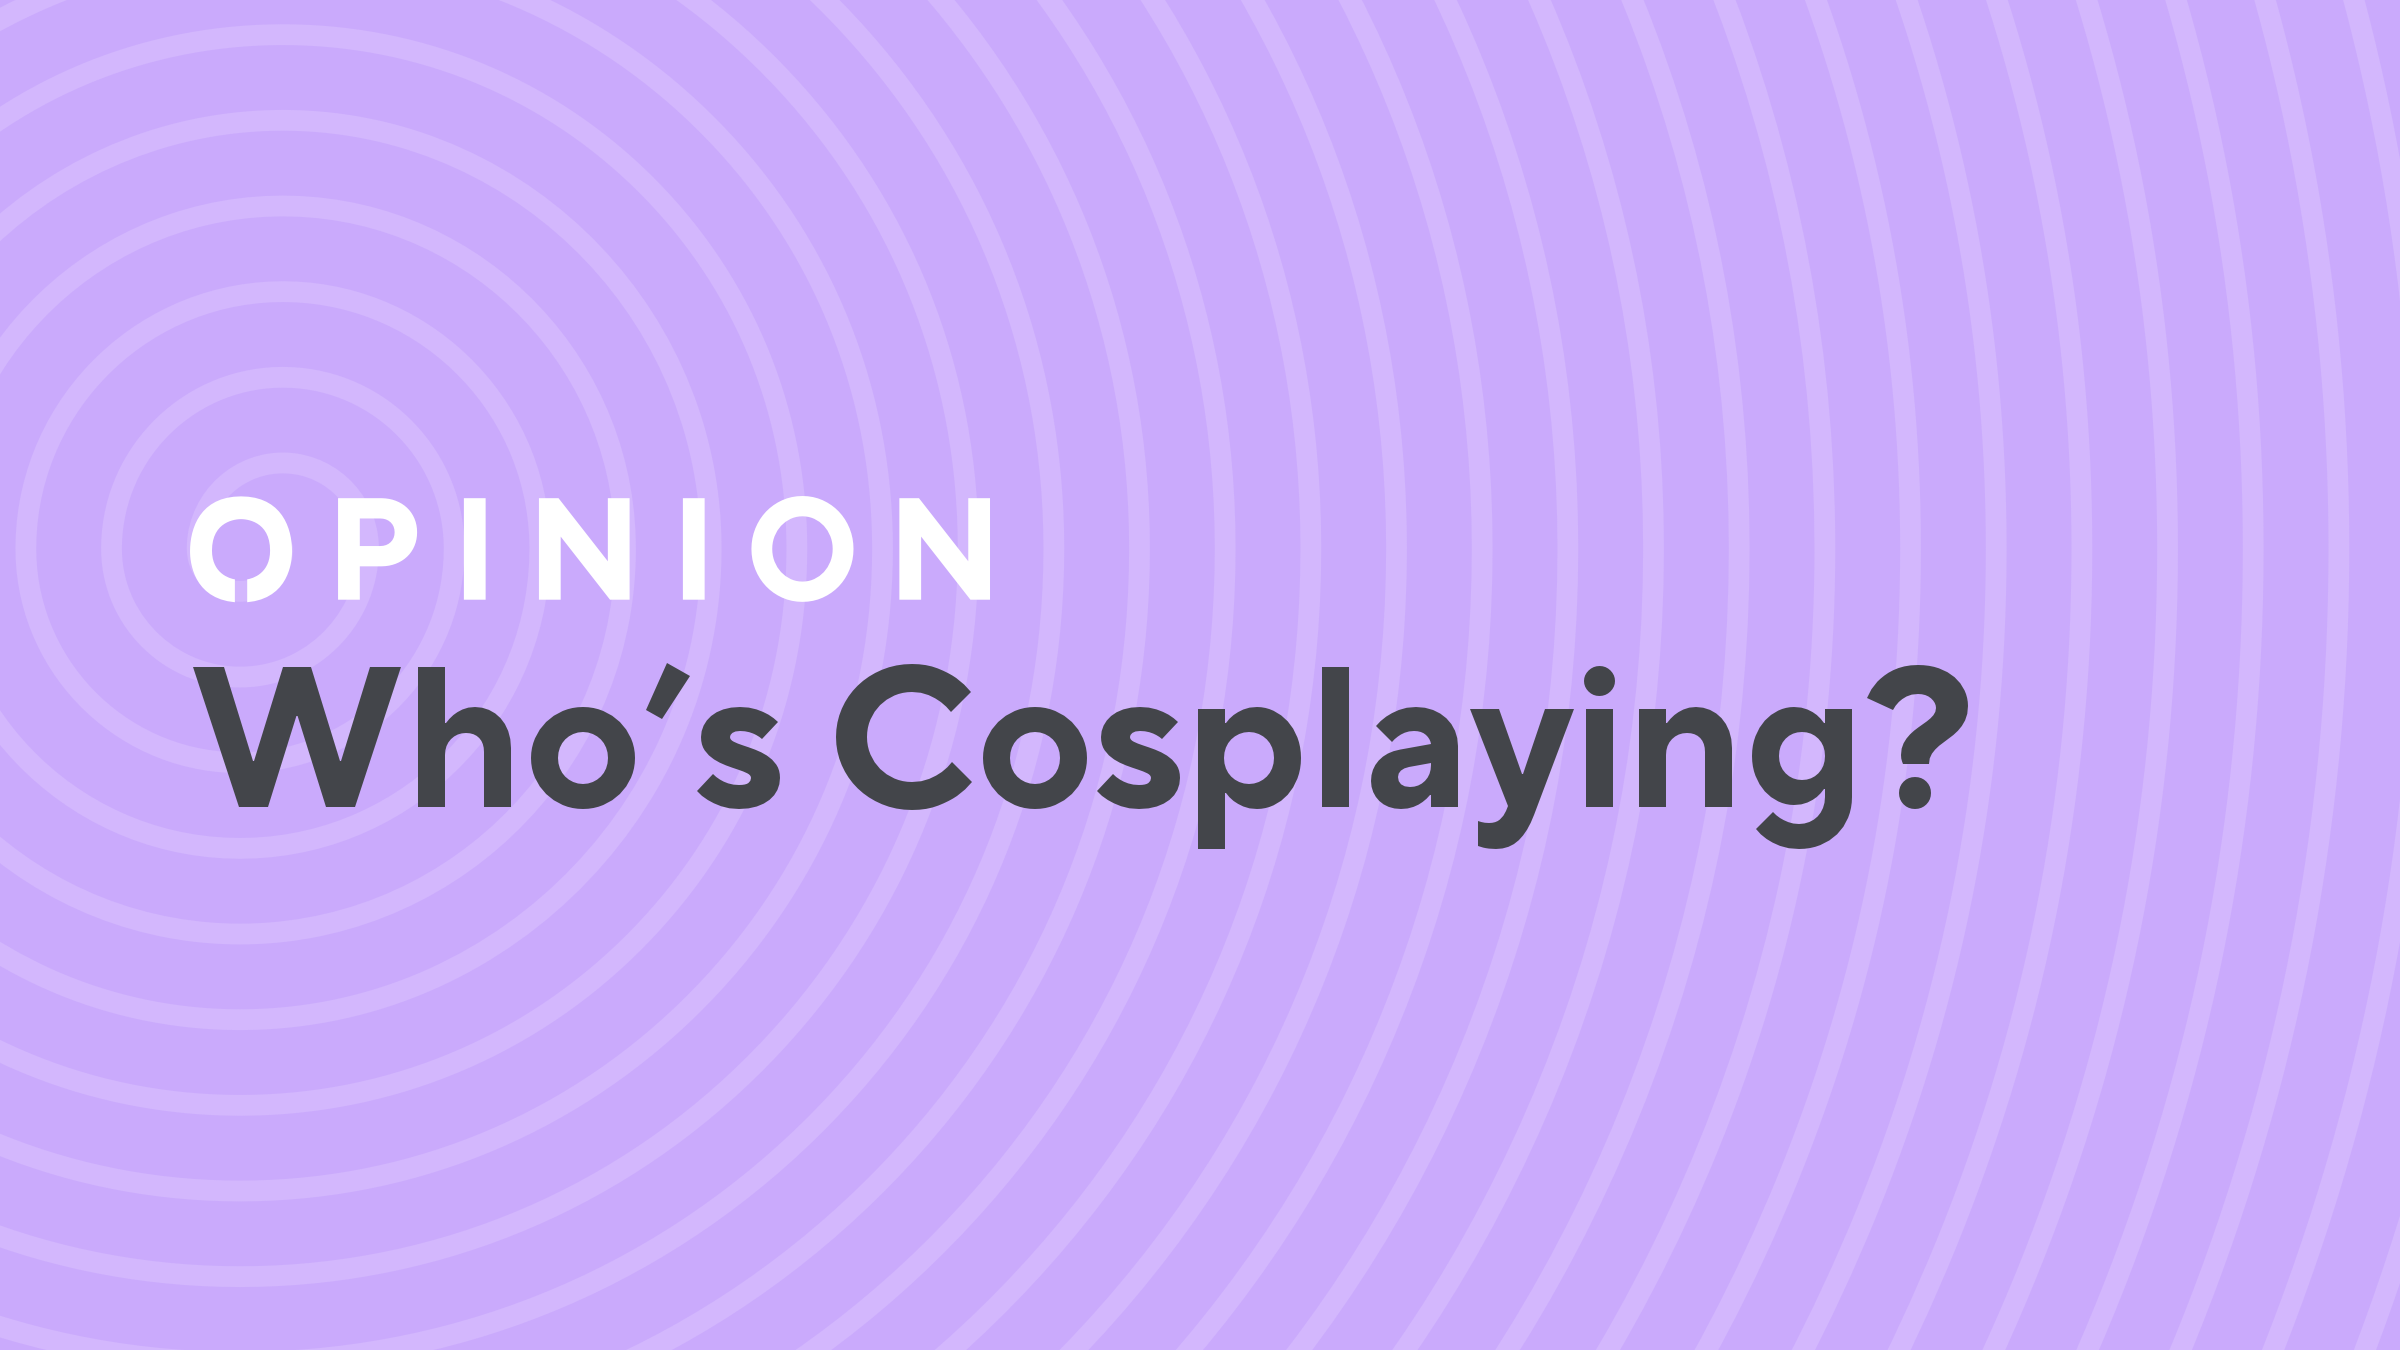 Who's Cosplaying?